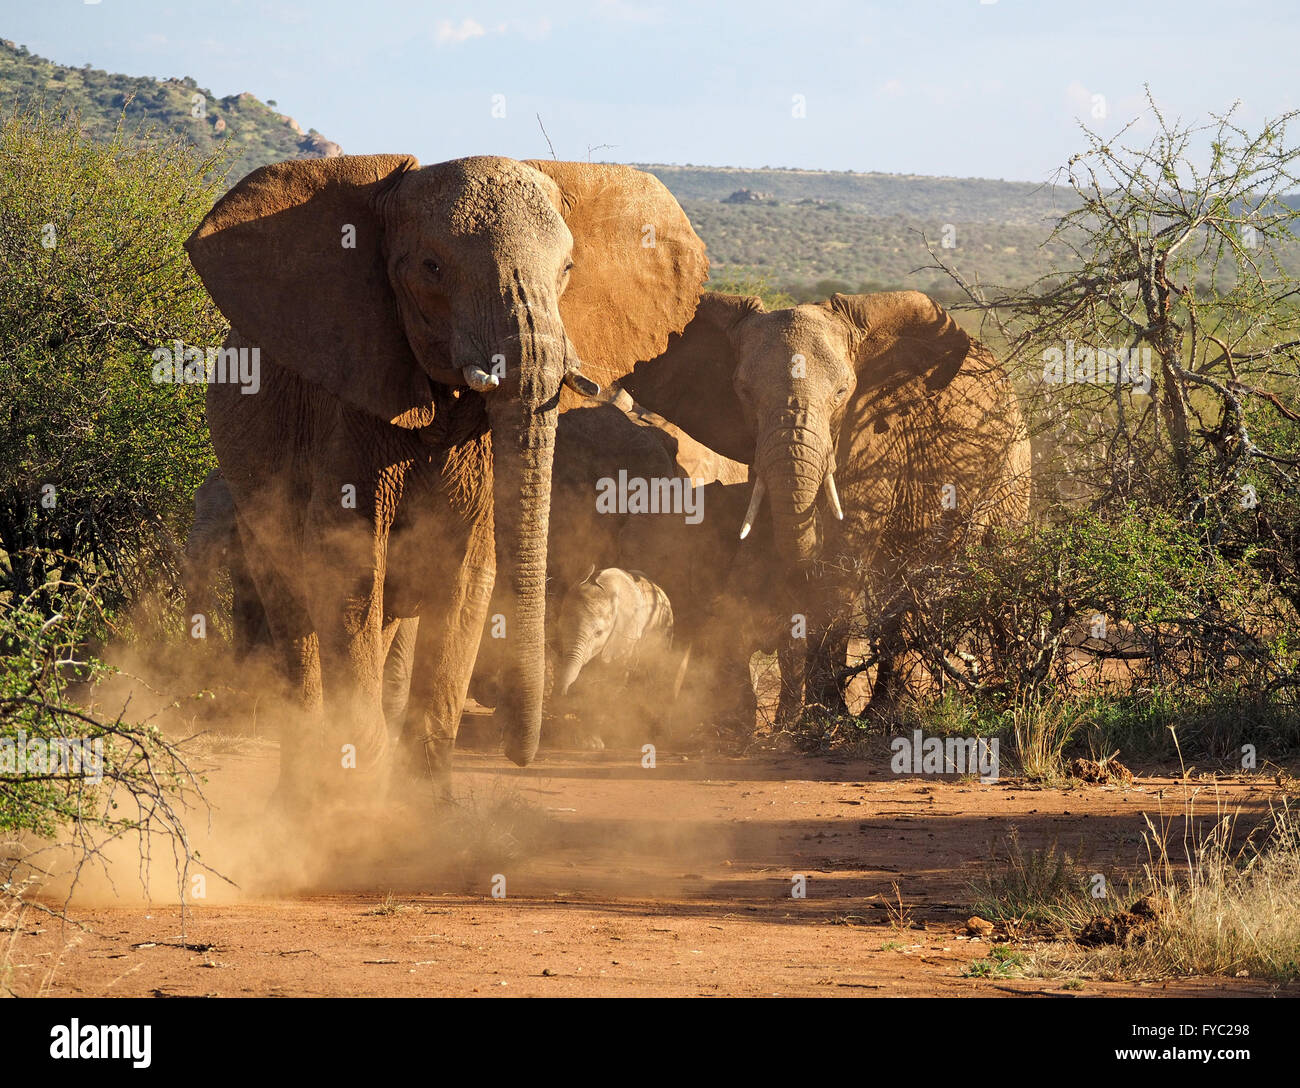 baby African elephant (Loxodonta Africana) in cloud of red dust kicked up by herd members angry at presence of wild dogs nearby Stock Photo